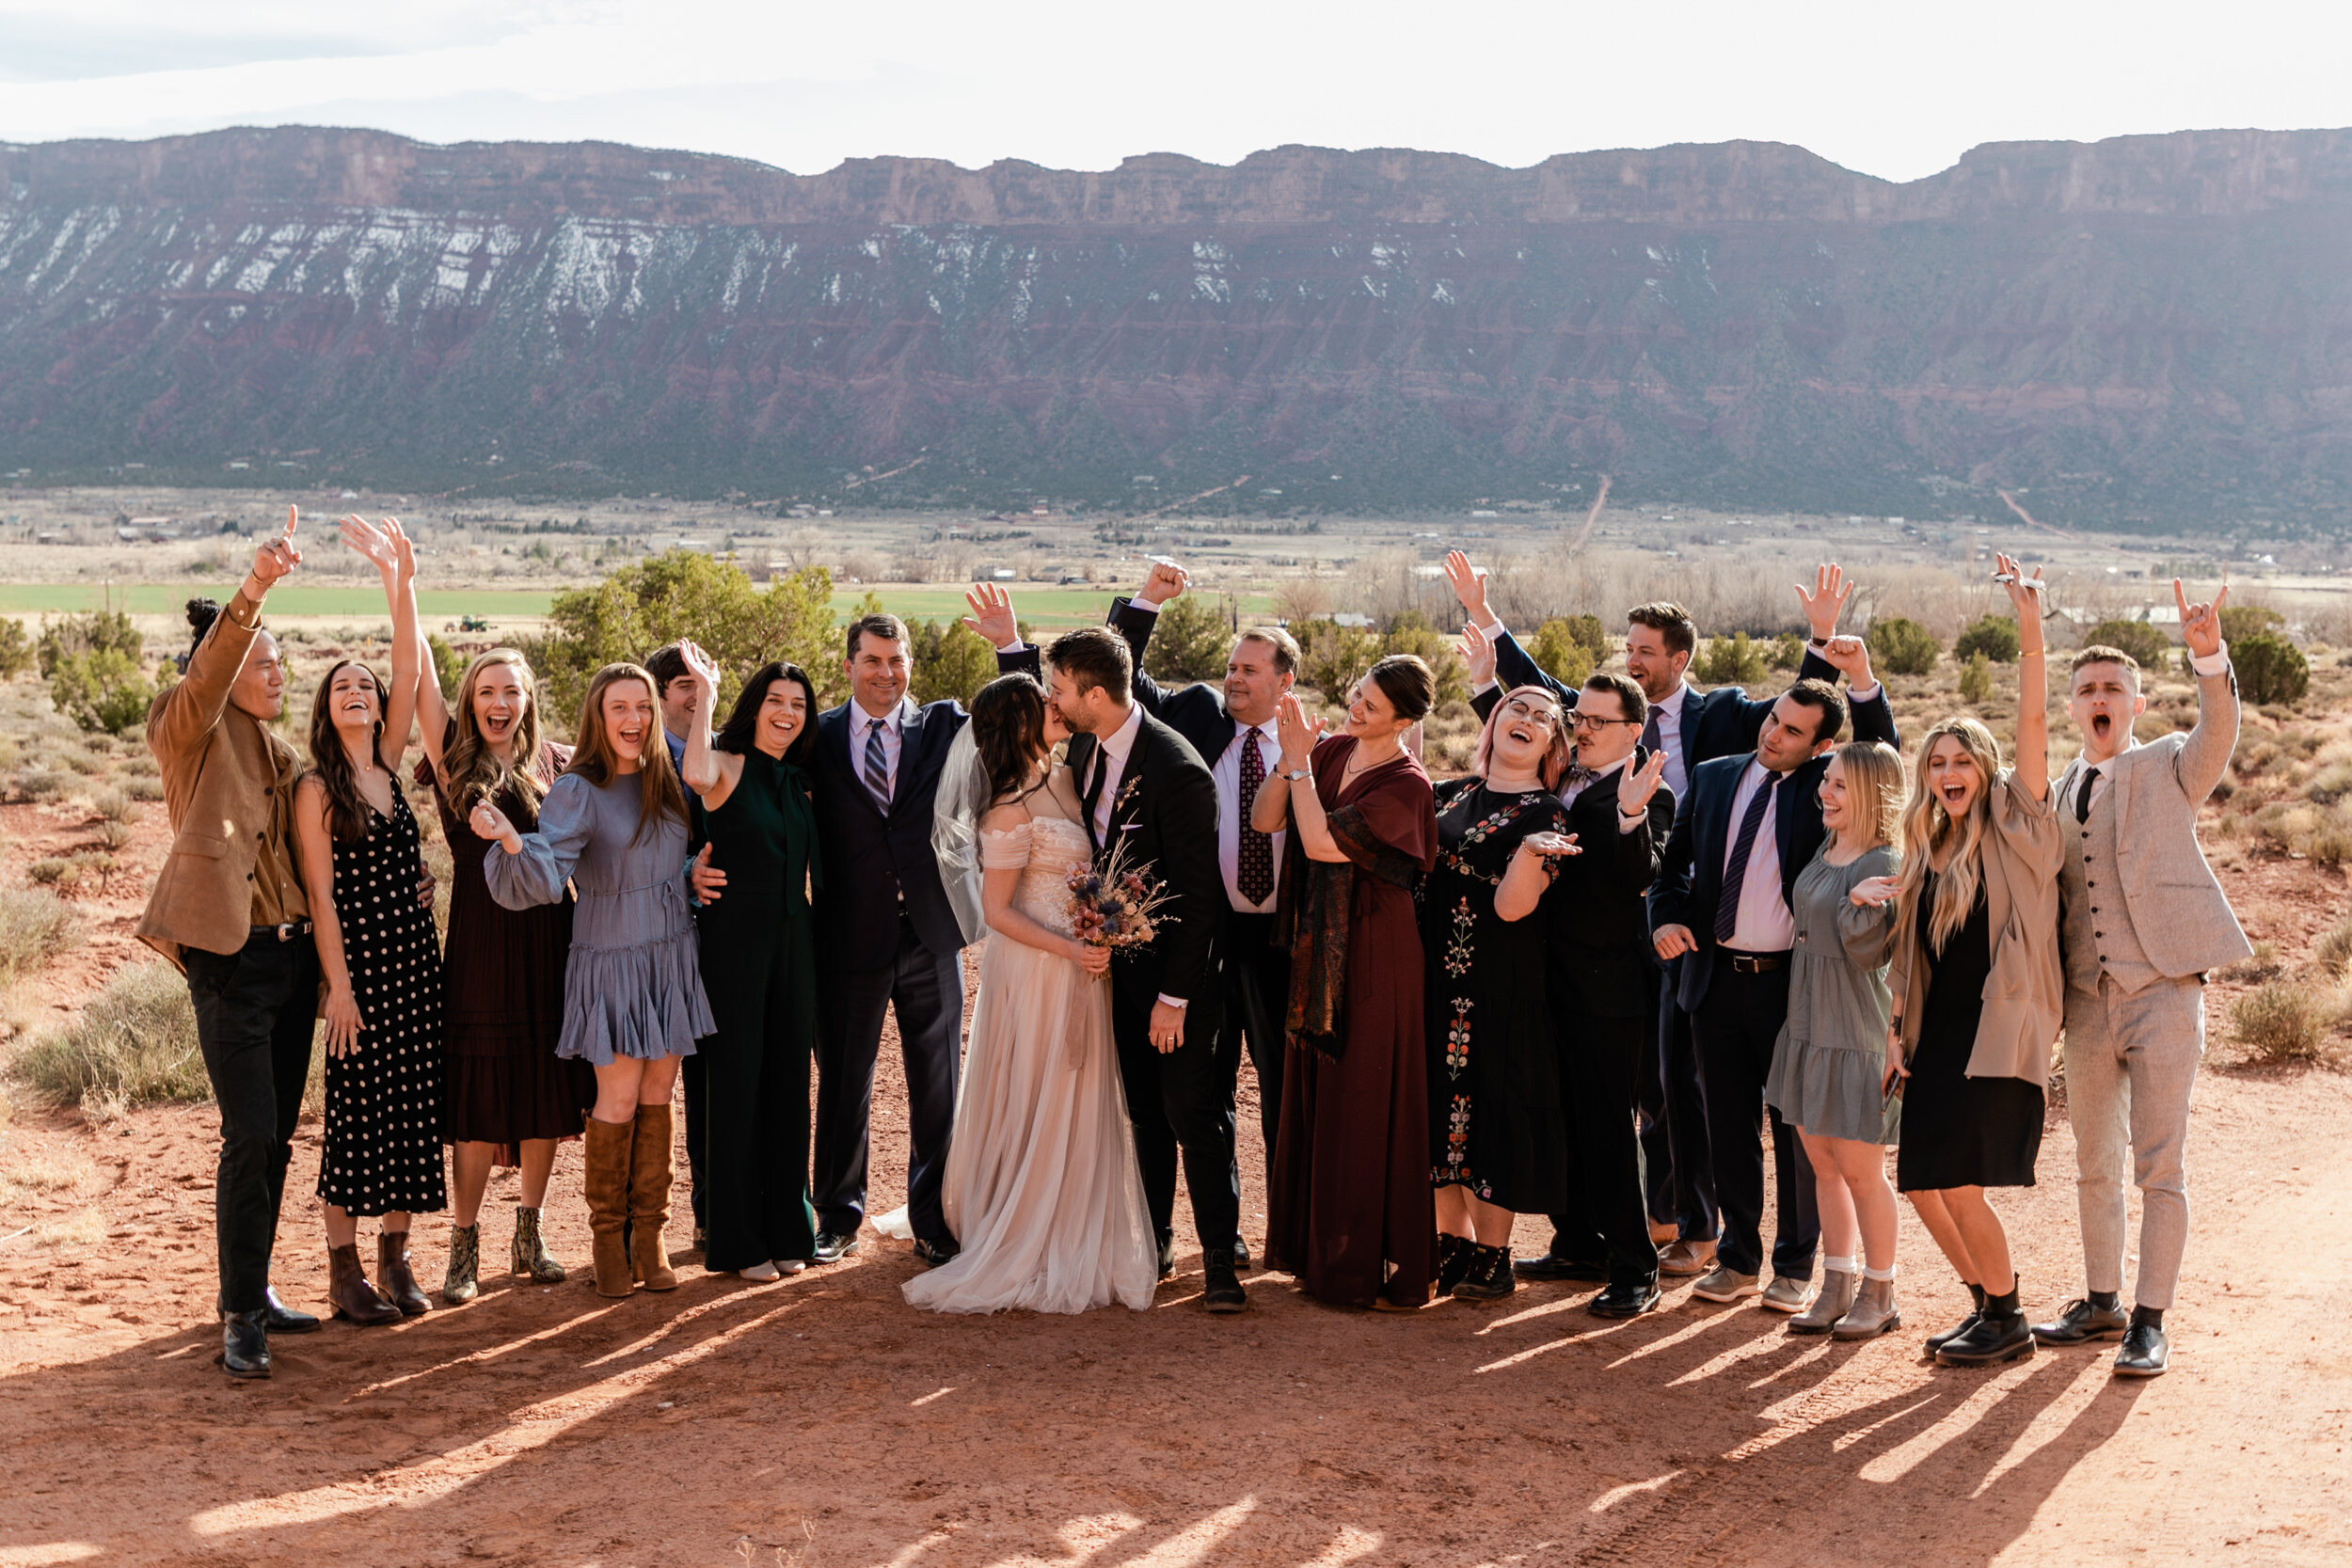 Moab Utah Elopement | Small Family Wedding near Arches National Park | The Hearnes Photography